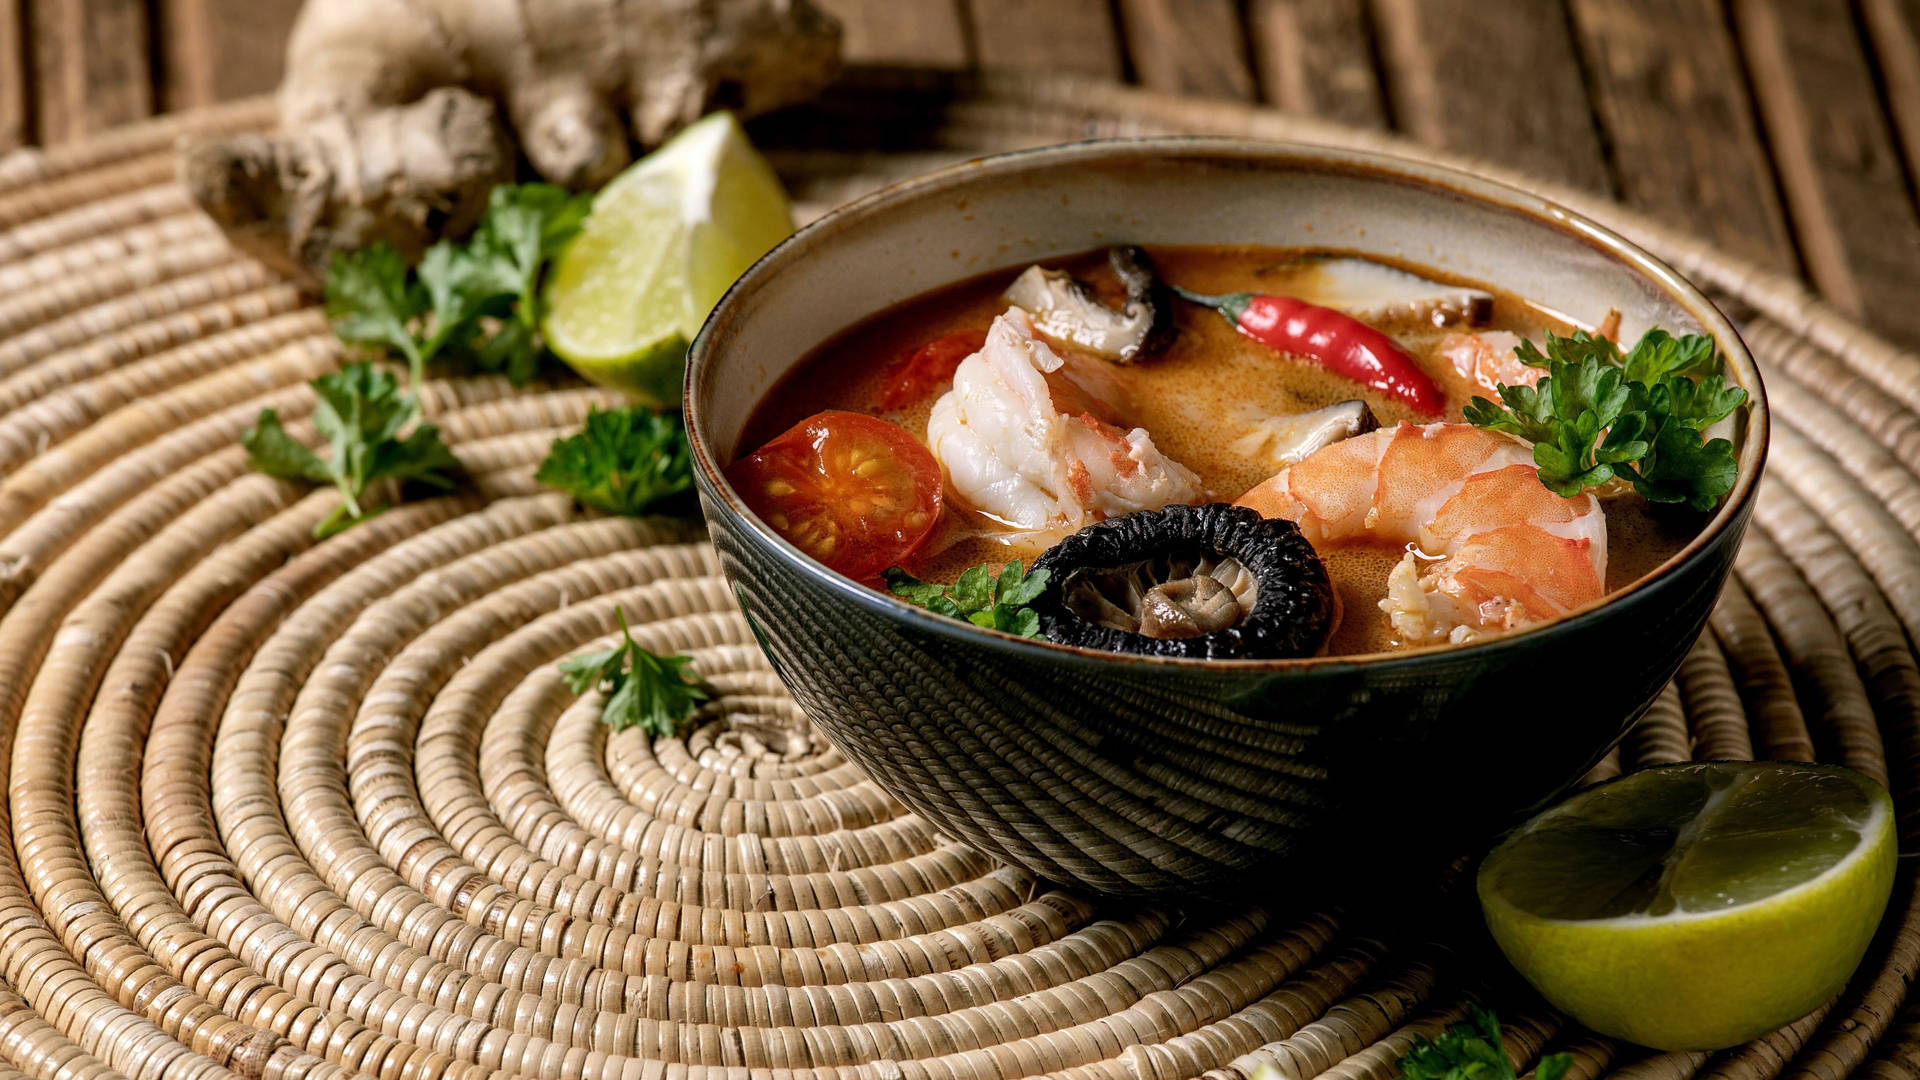 Savory and Spicy Tom Yum Soup from Thailand Wallpaper